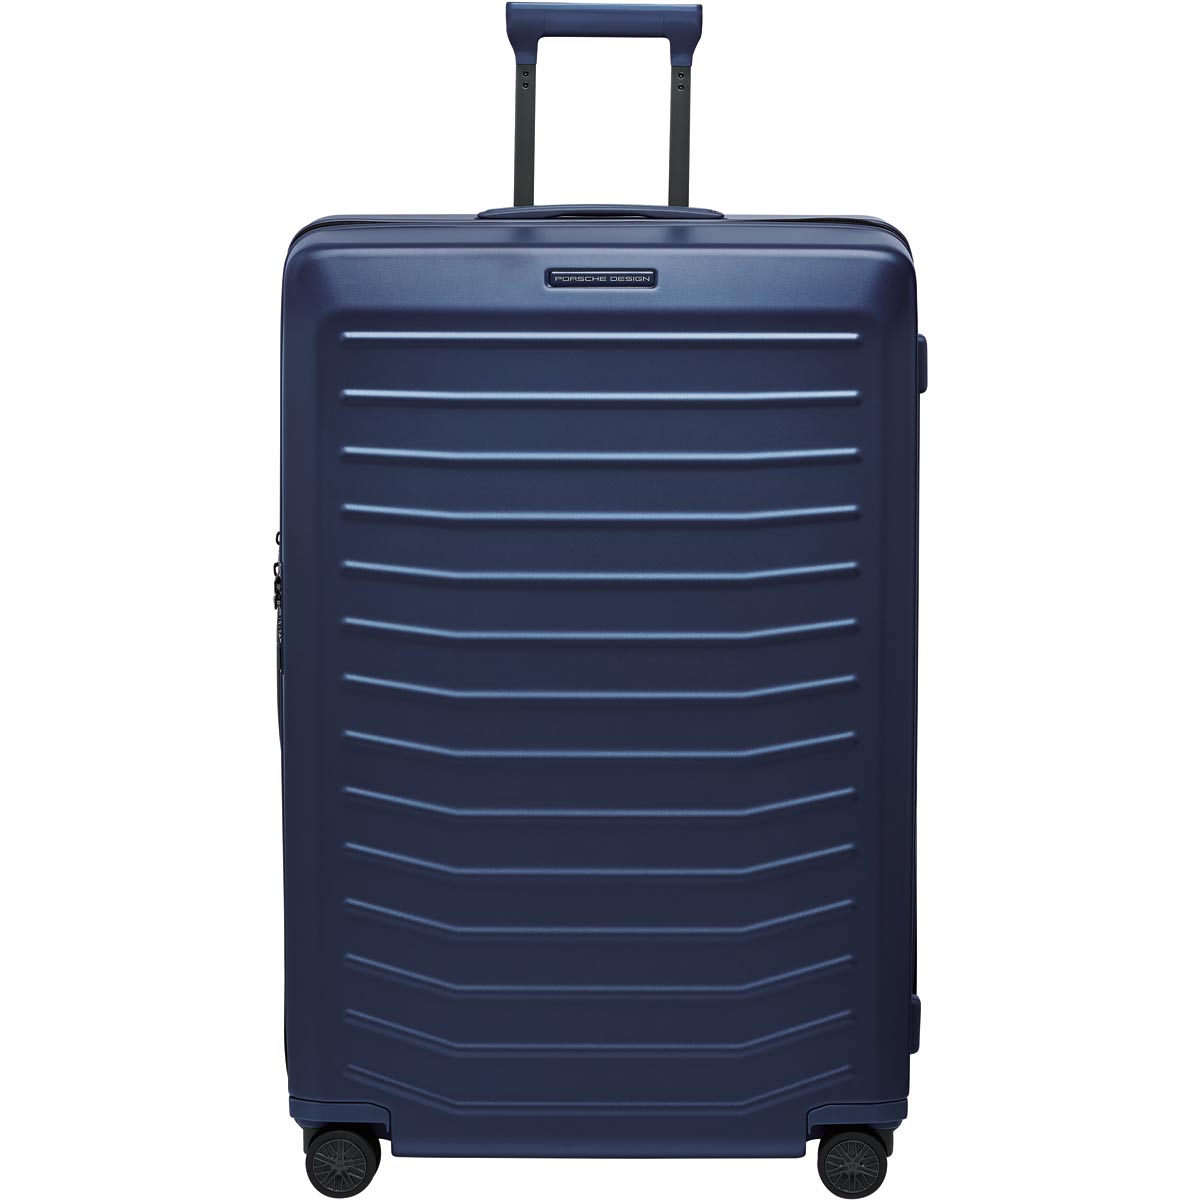 Design Roadster 32" Expandable Spinner Lexington Luggage